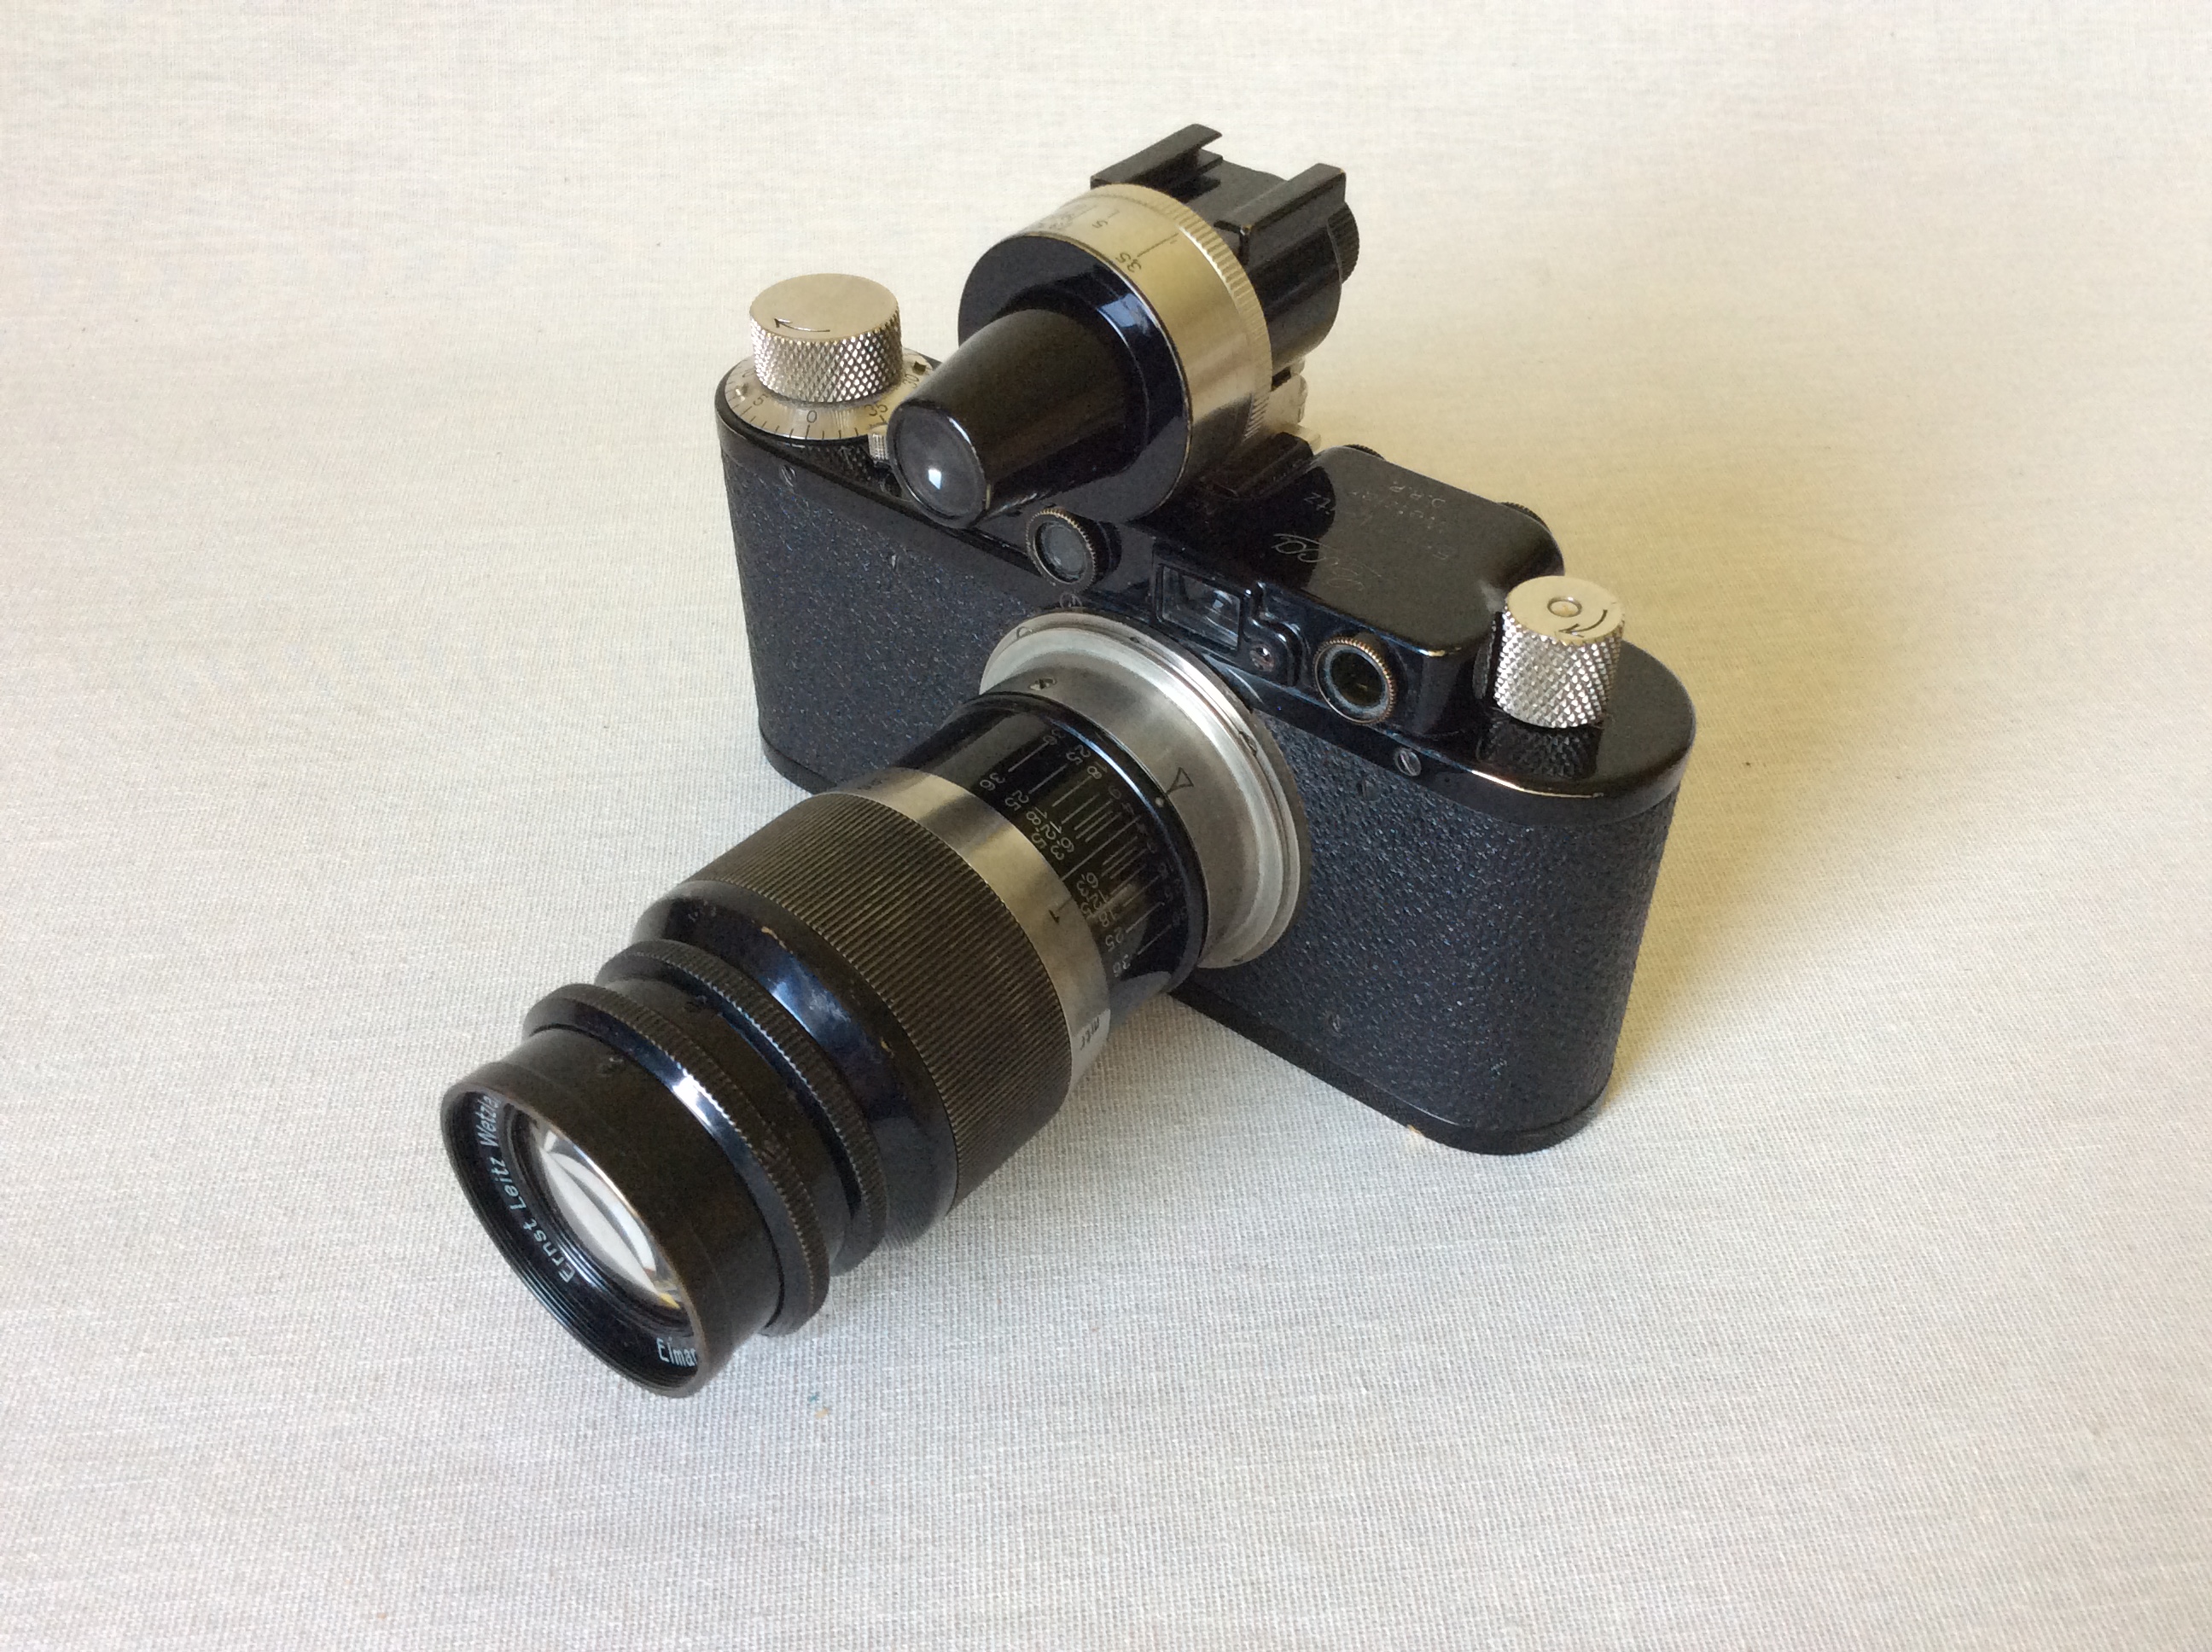 Miniature Masterpieces – Leica VISOR, VIDOM and VIOOH viewfinders